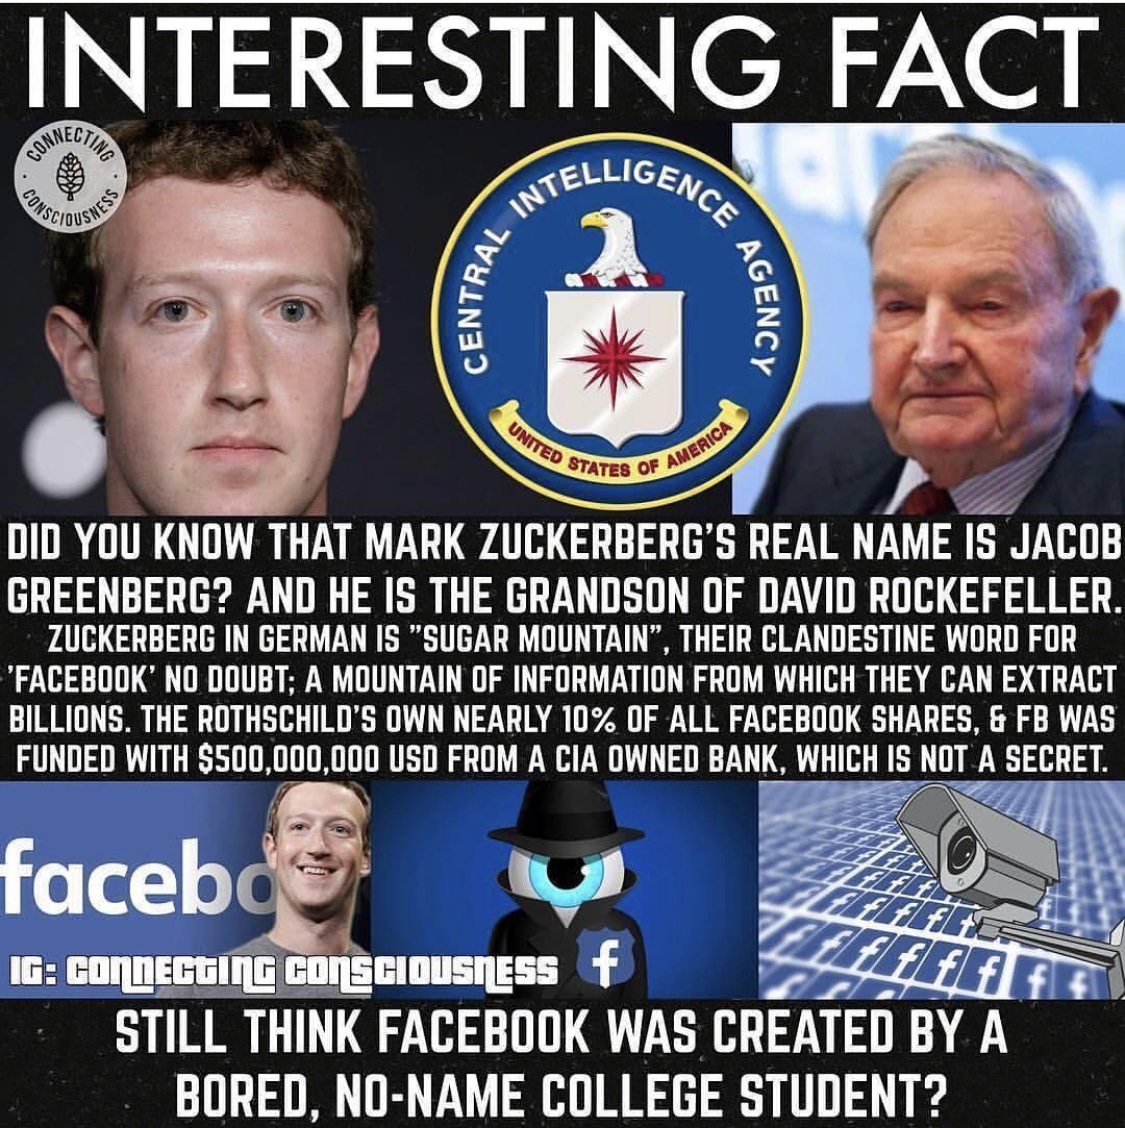 Mark Zuckerberg exposed - his real name is Jacob Greenberg, part of the Rotschild family